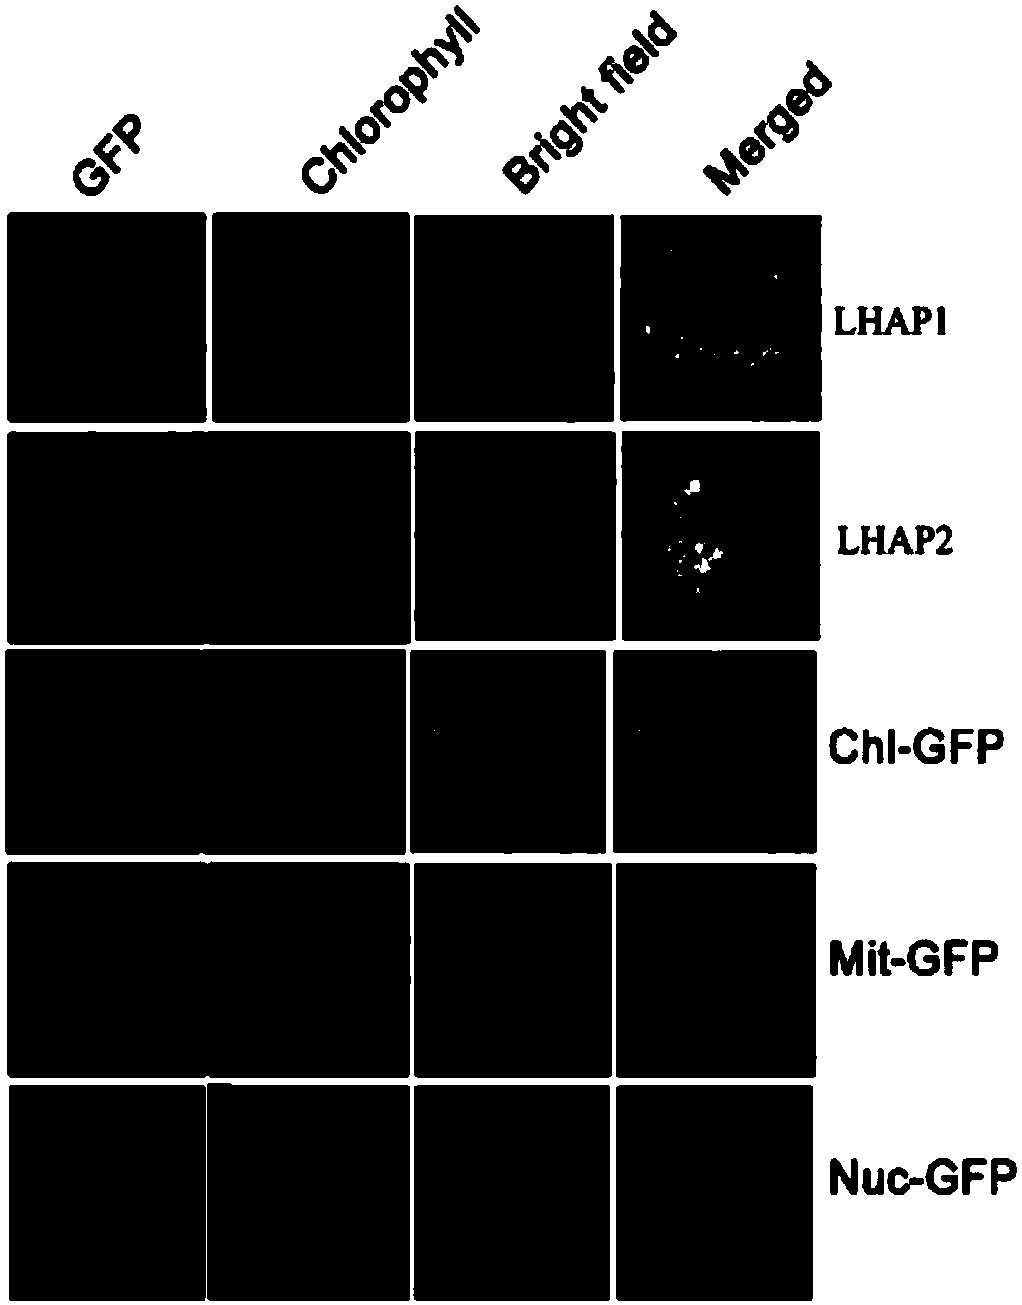 Application of LHAP1 protein and its coding gene in regulation of plant photosynthesis